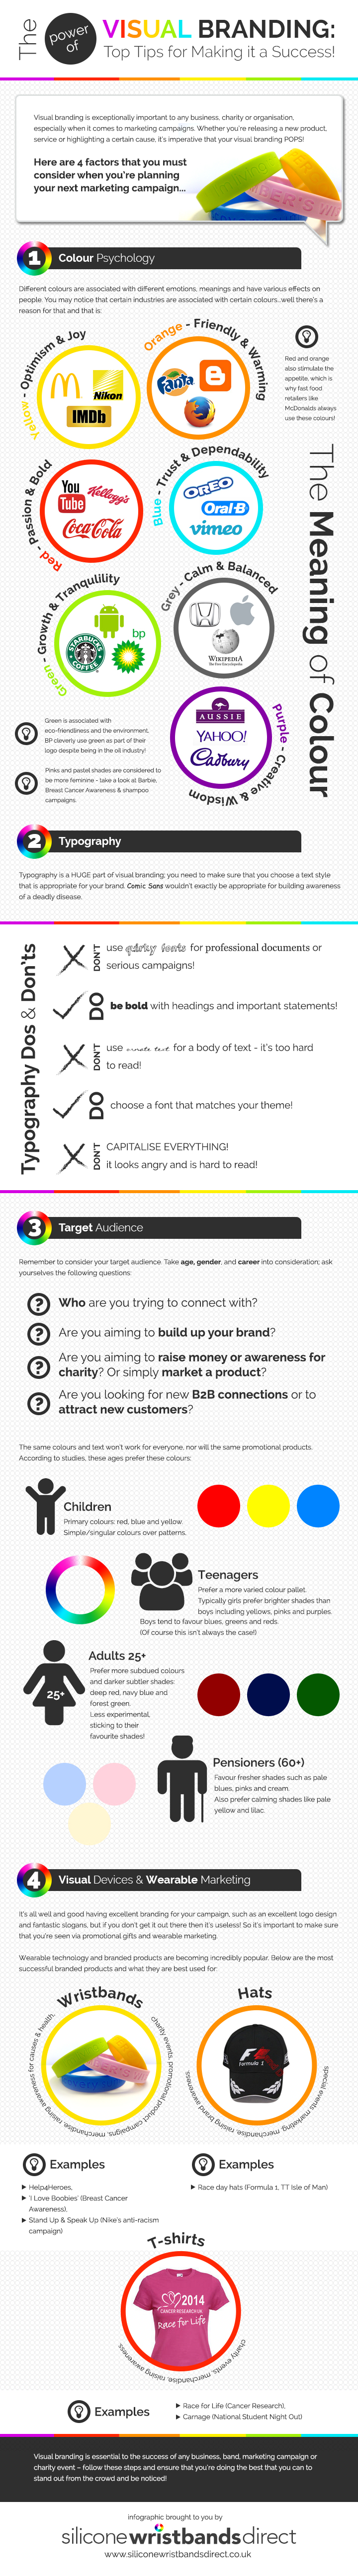 The Power of Visual Branding infographic